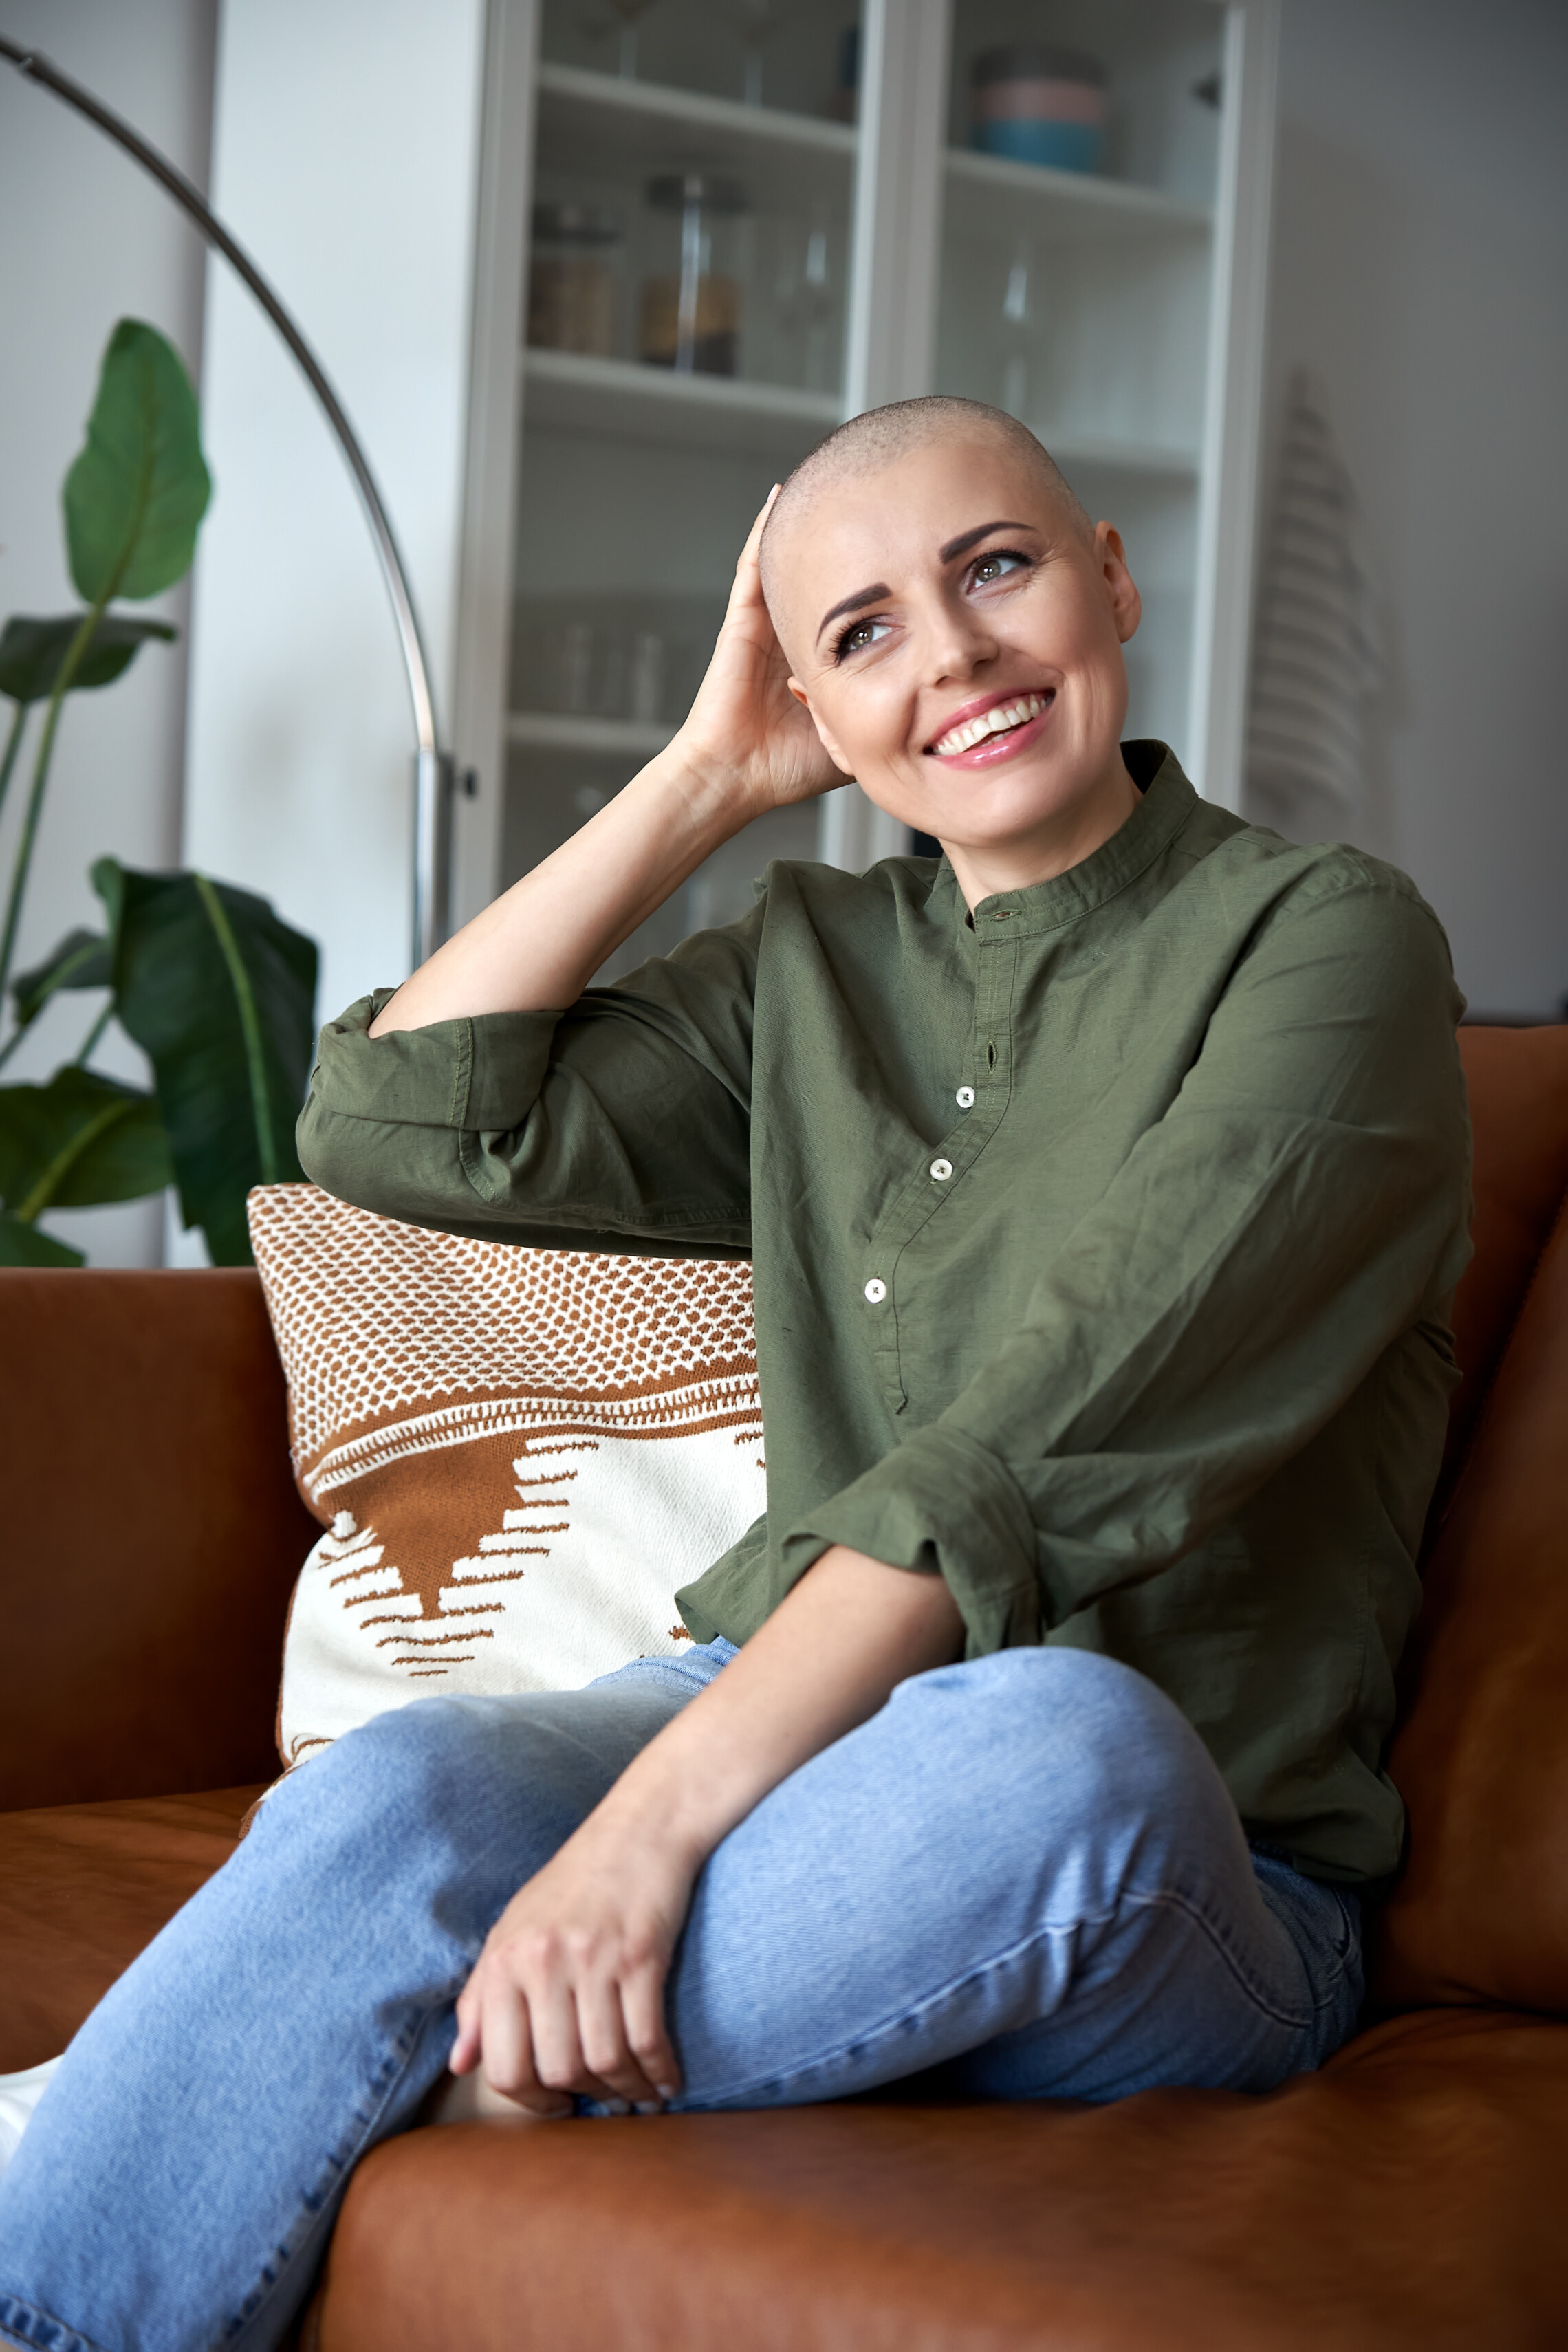 Person sitting on couch smiling